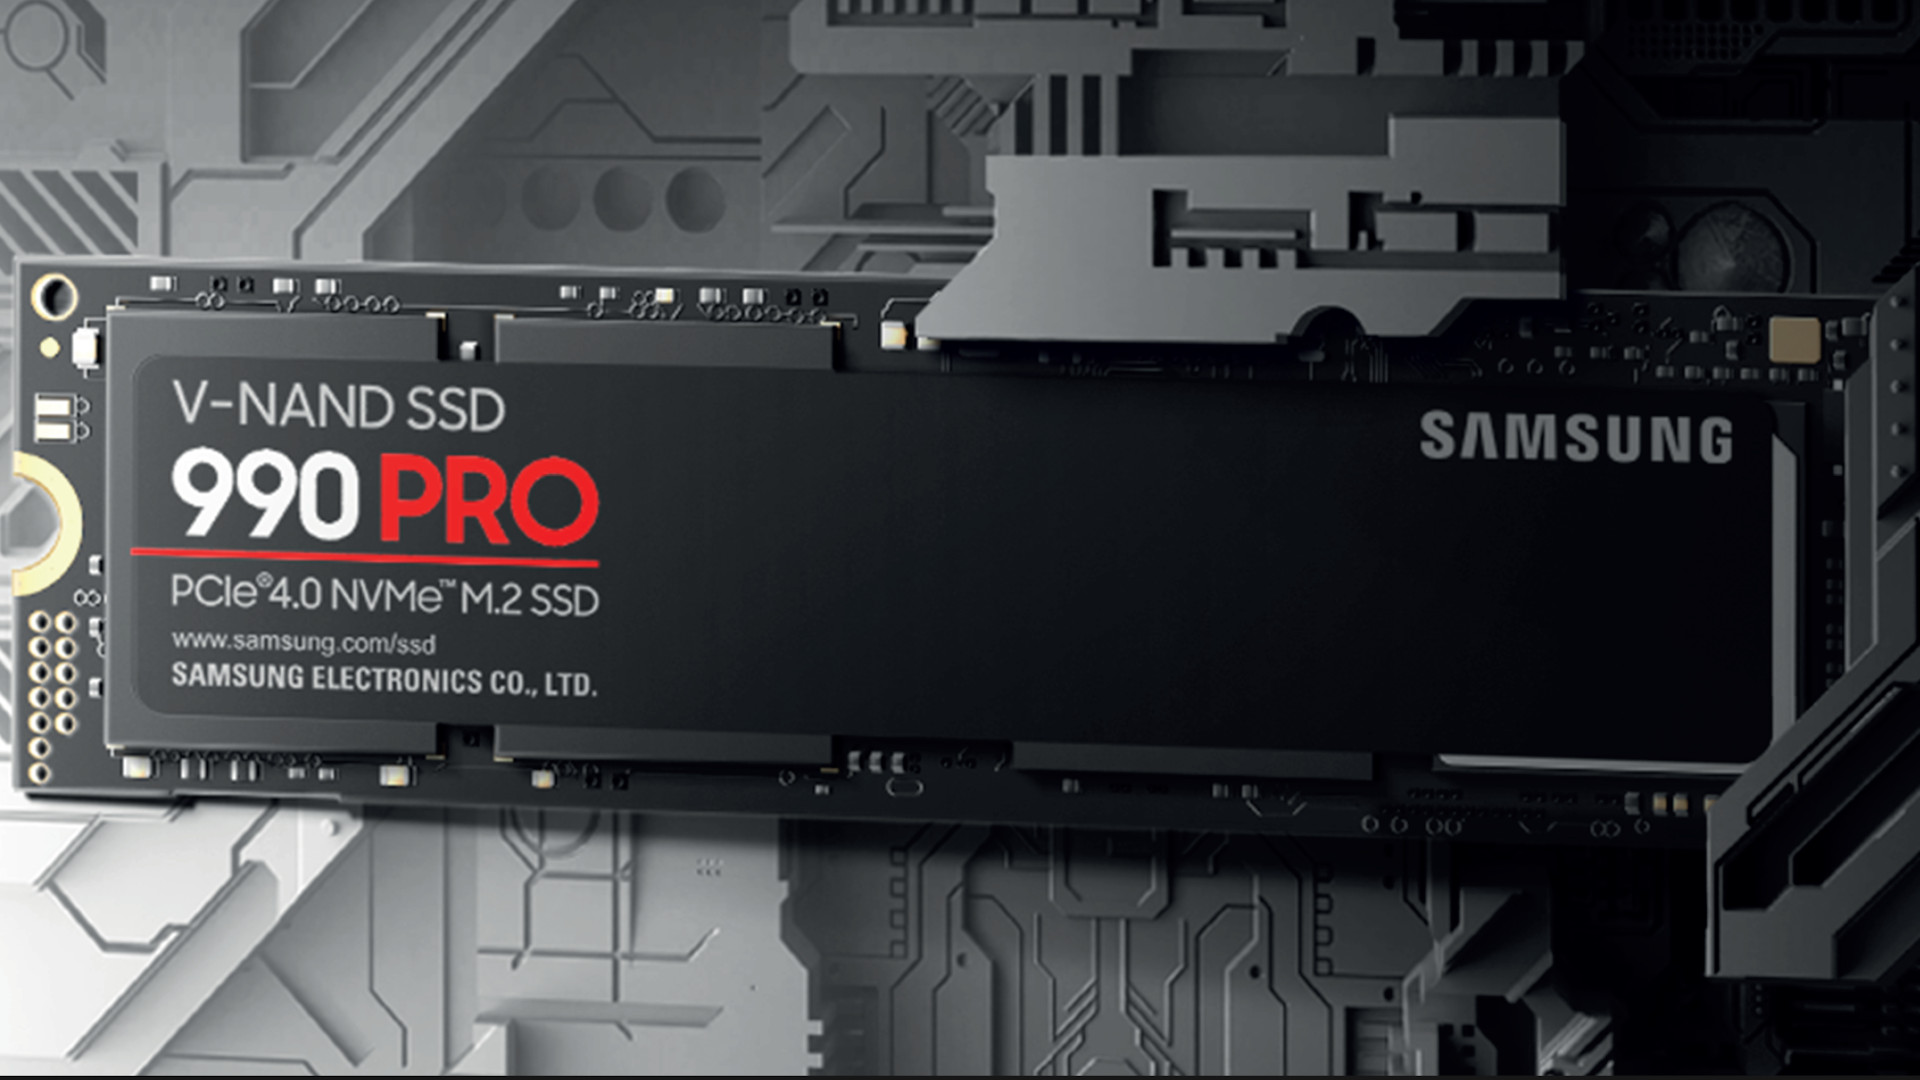 Get the Samsung 990 Pro NVMe SSD at its lowest ever price on Amazon